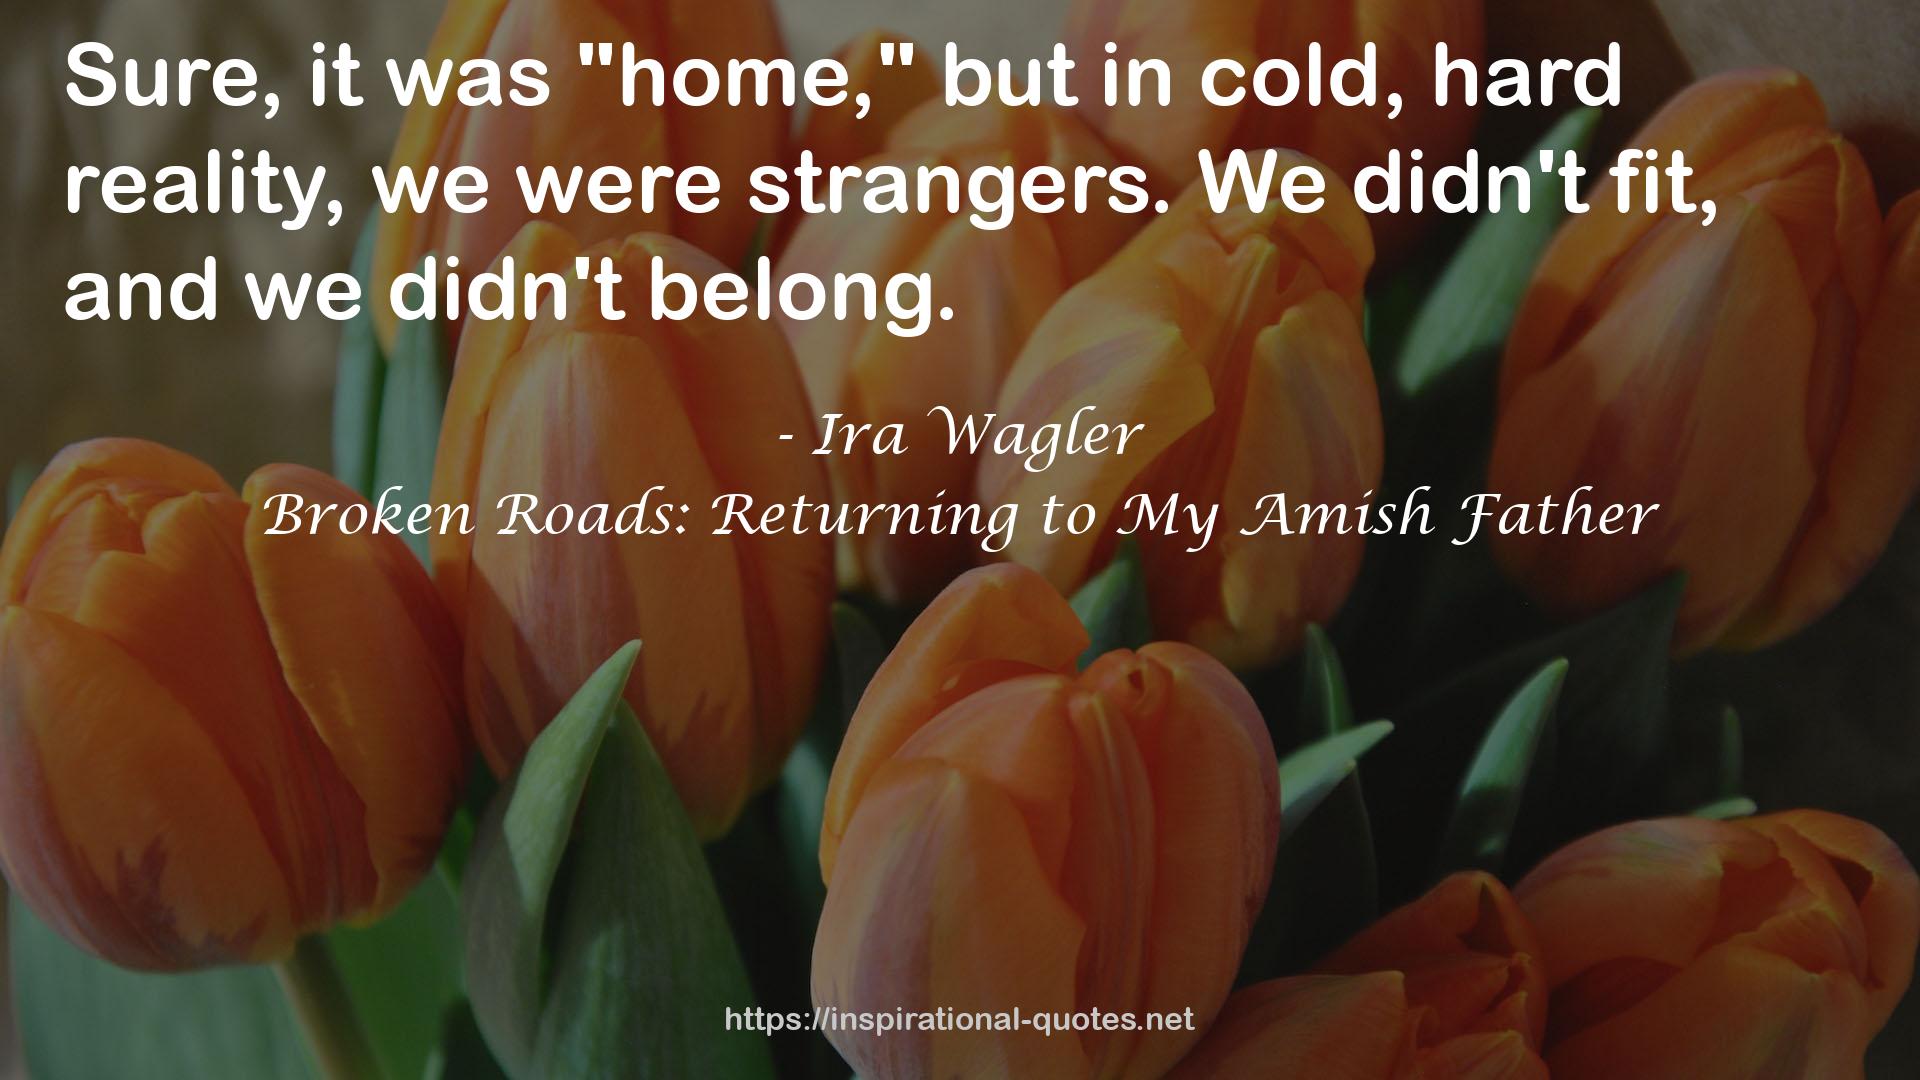 Broken Roads: Returning to My Amish Father QUOTES